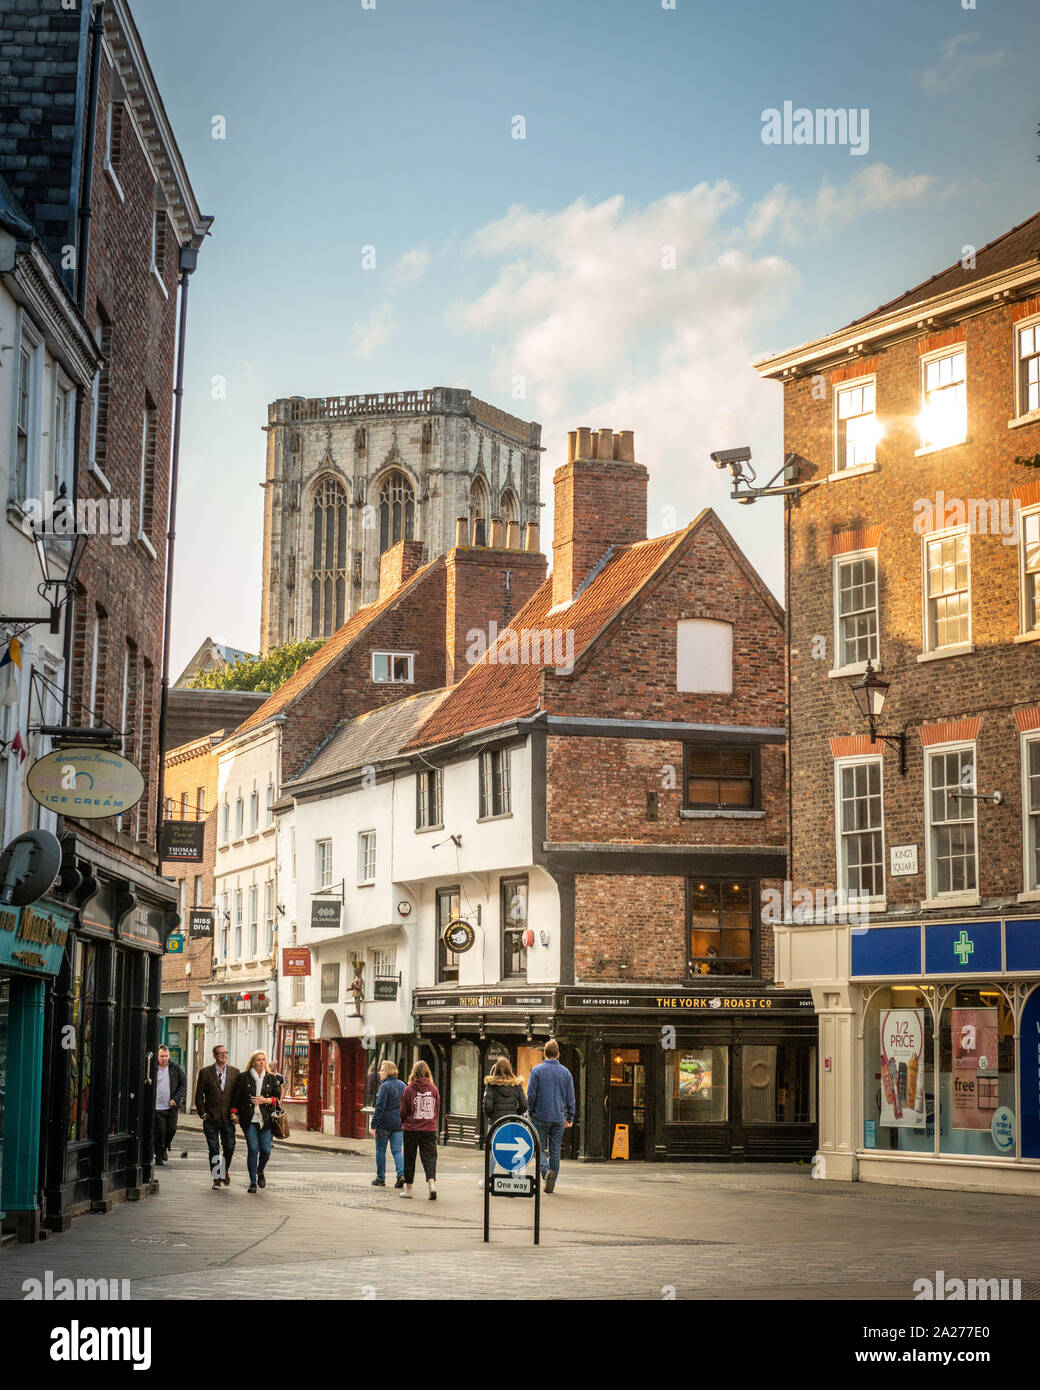 York Minster seen through the medieval streets of York's historical town centre Stock Photo